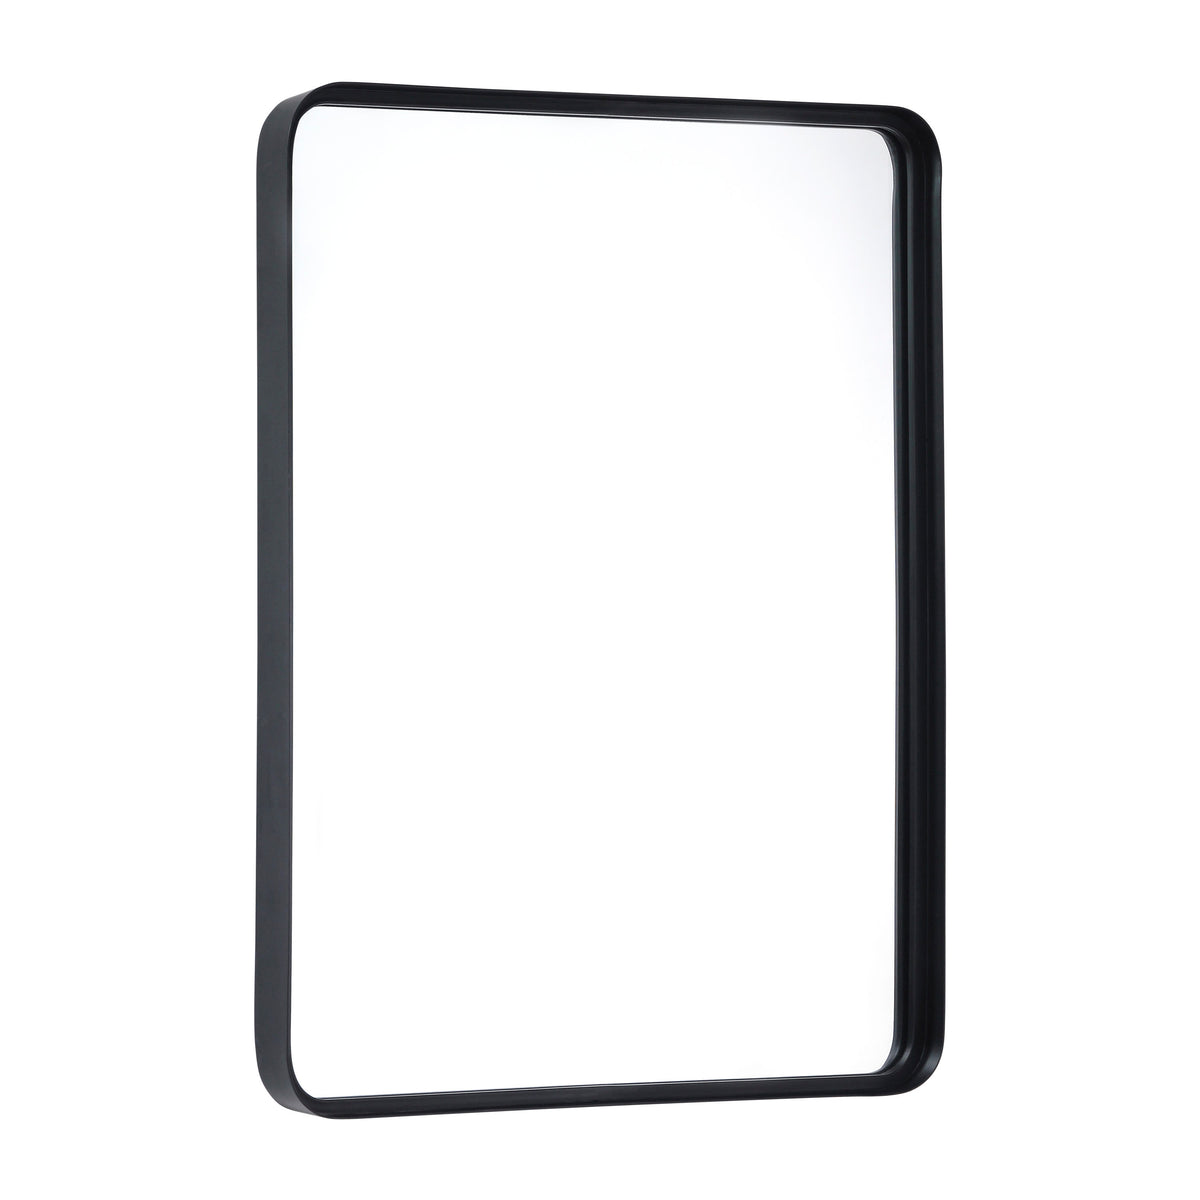 Black,30"W x 40"L |#| Large Rectangular Accent Mirror with 2 Inch Deep Frame in Black - 30" x 40"